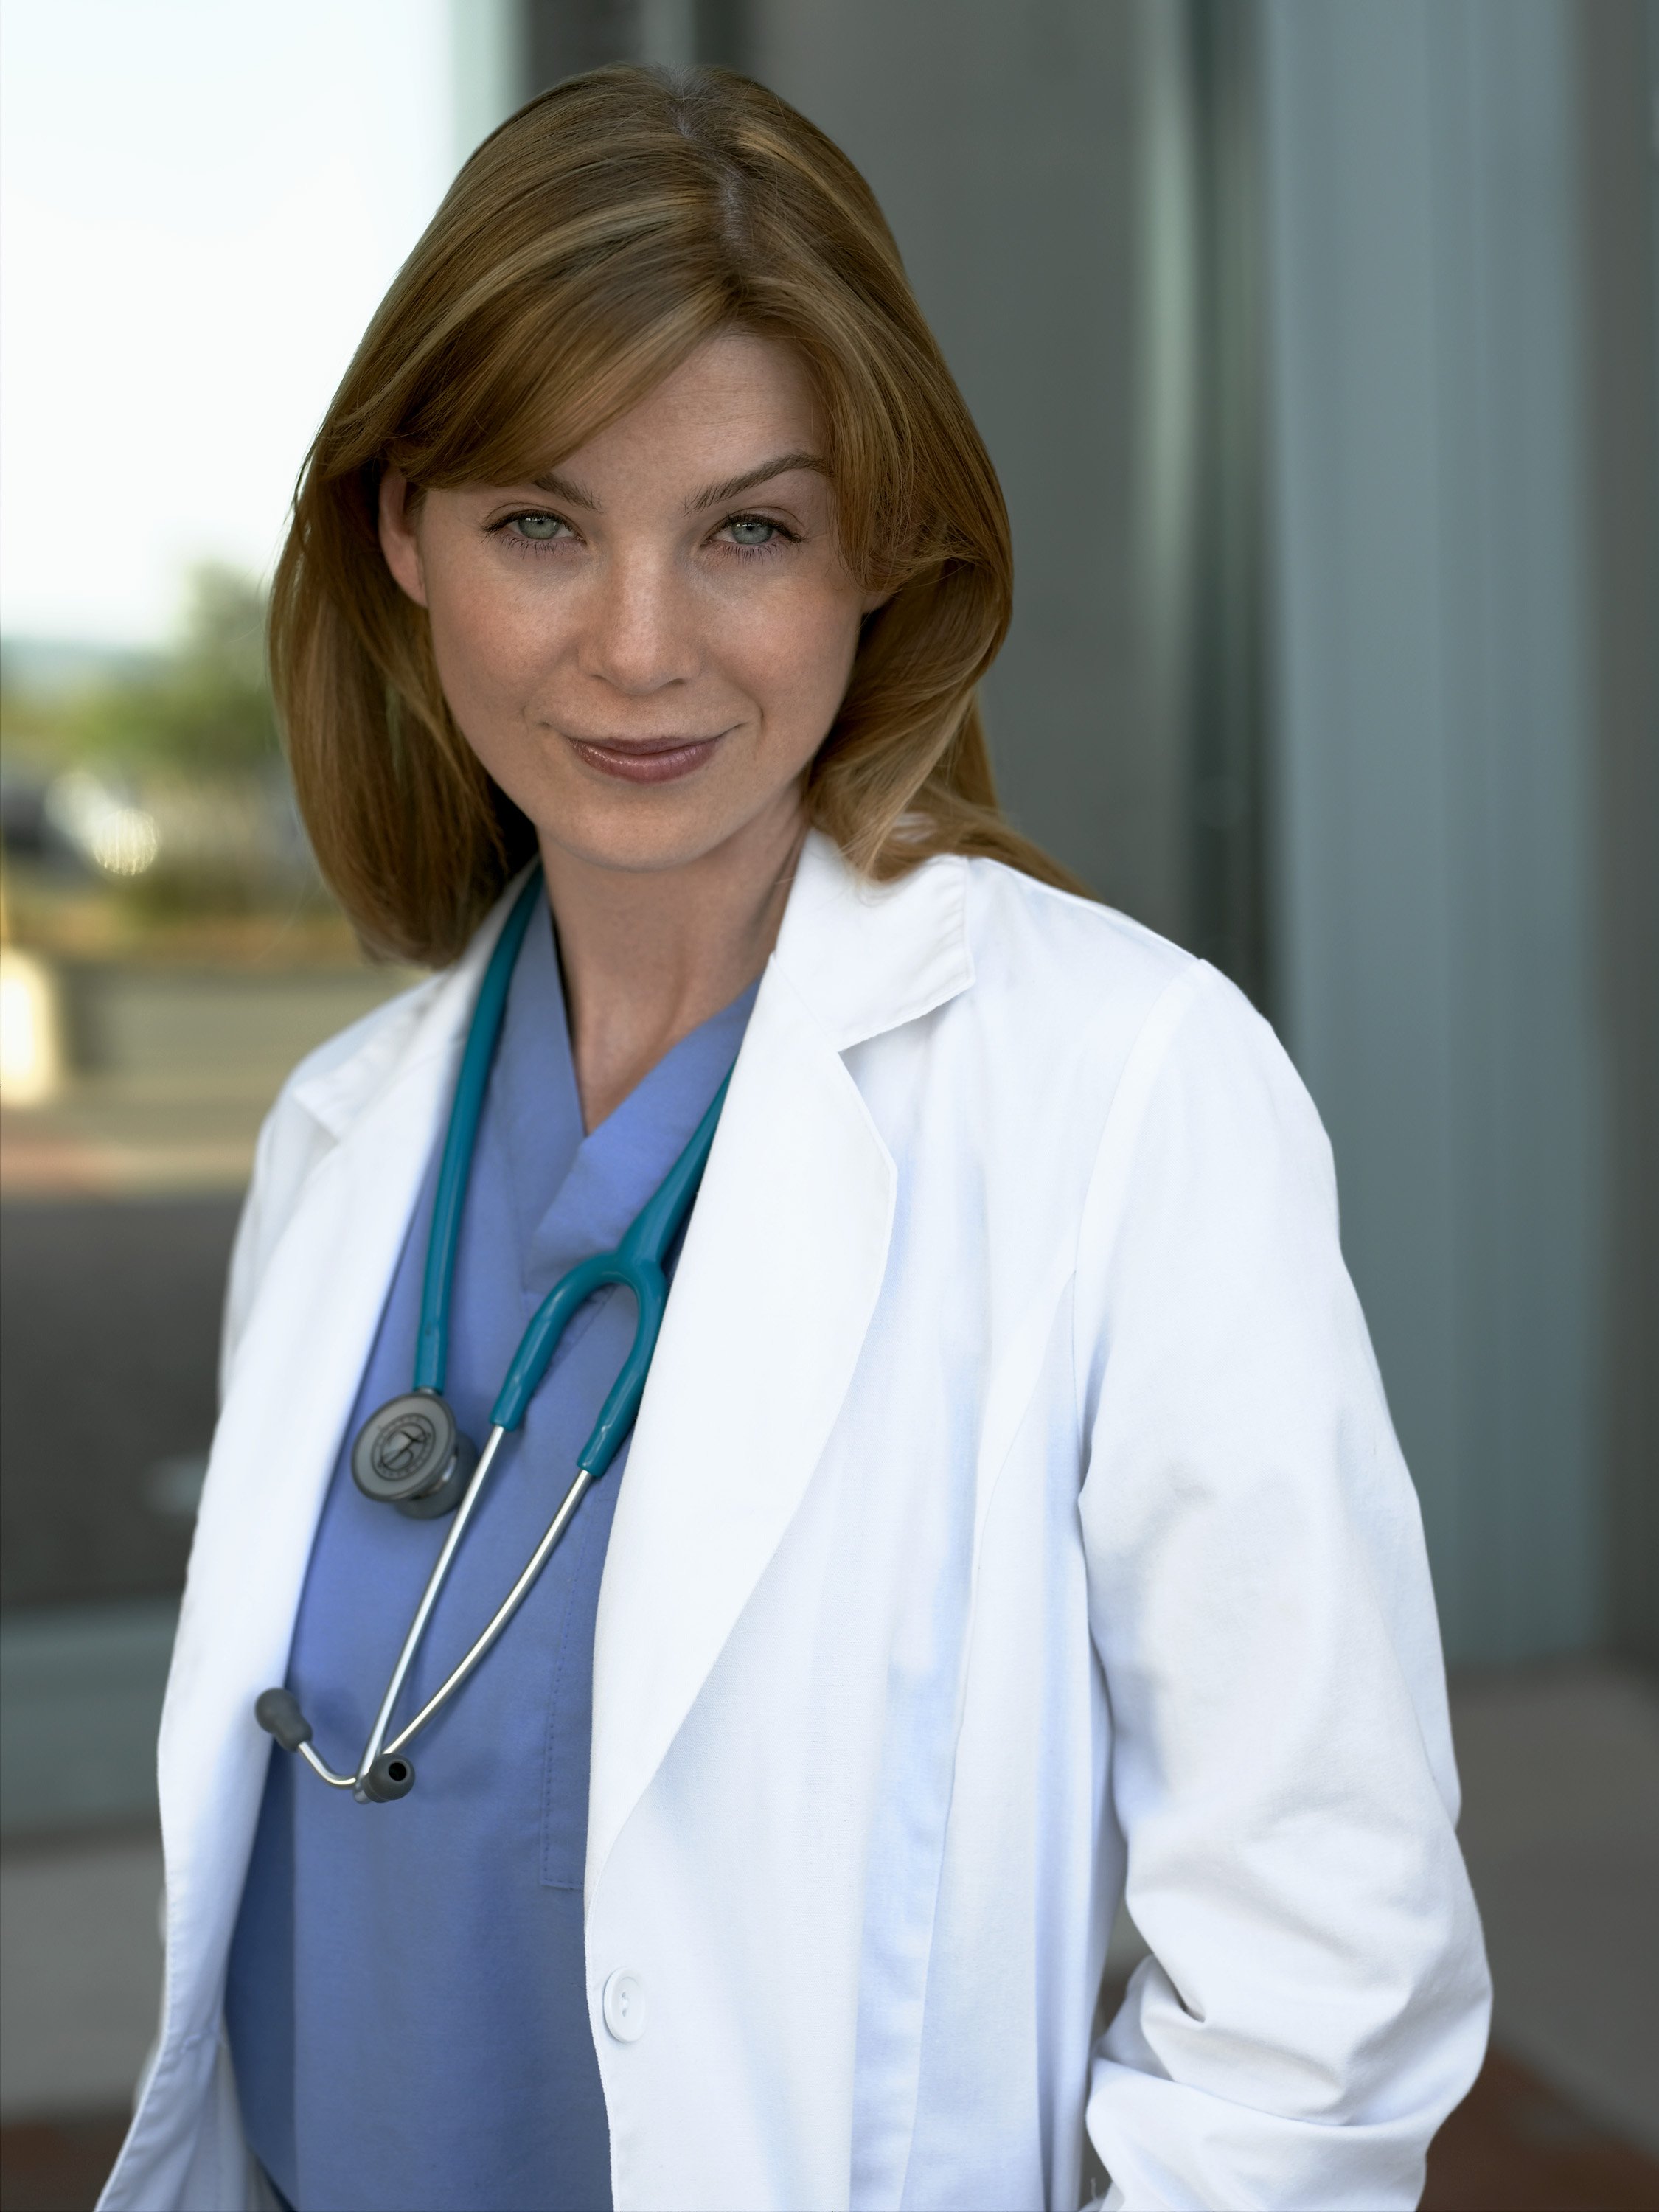 Ellen Pompeo on "Grey's Anatomy" on May 13, 2005 | Source: Getty Images 